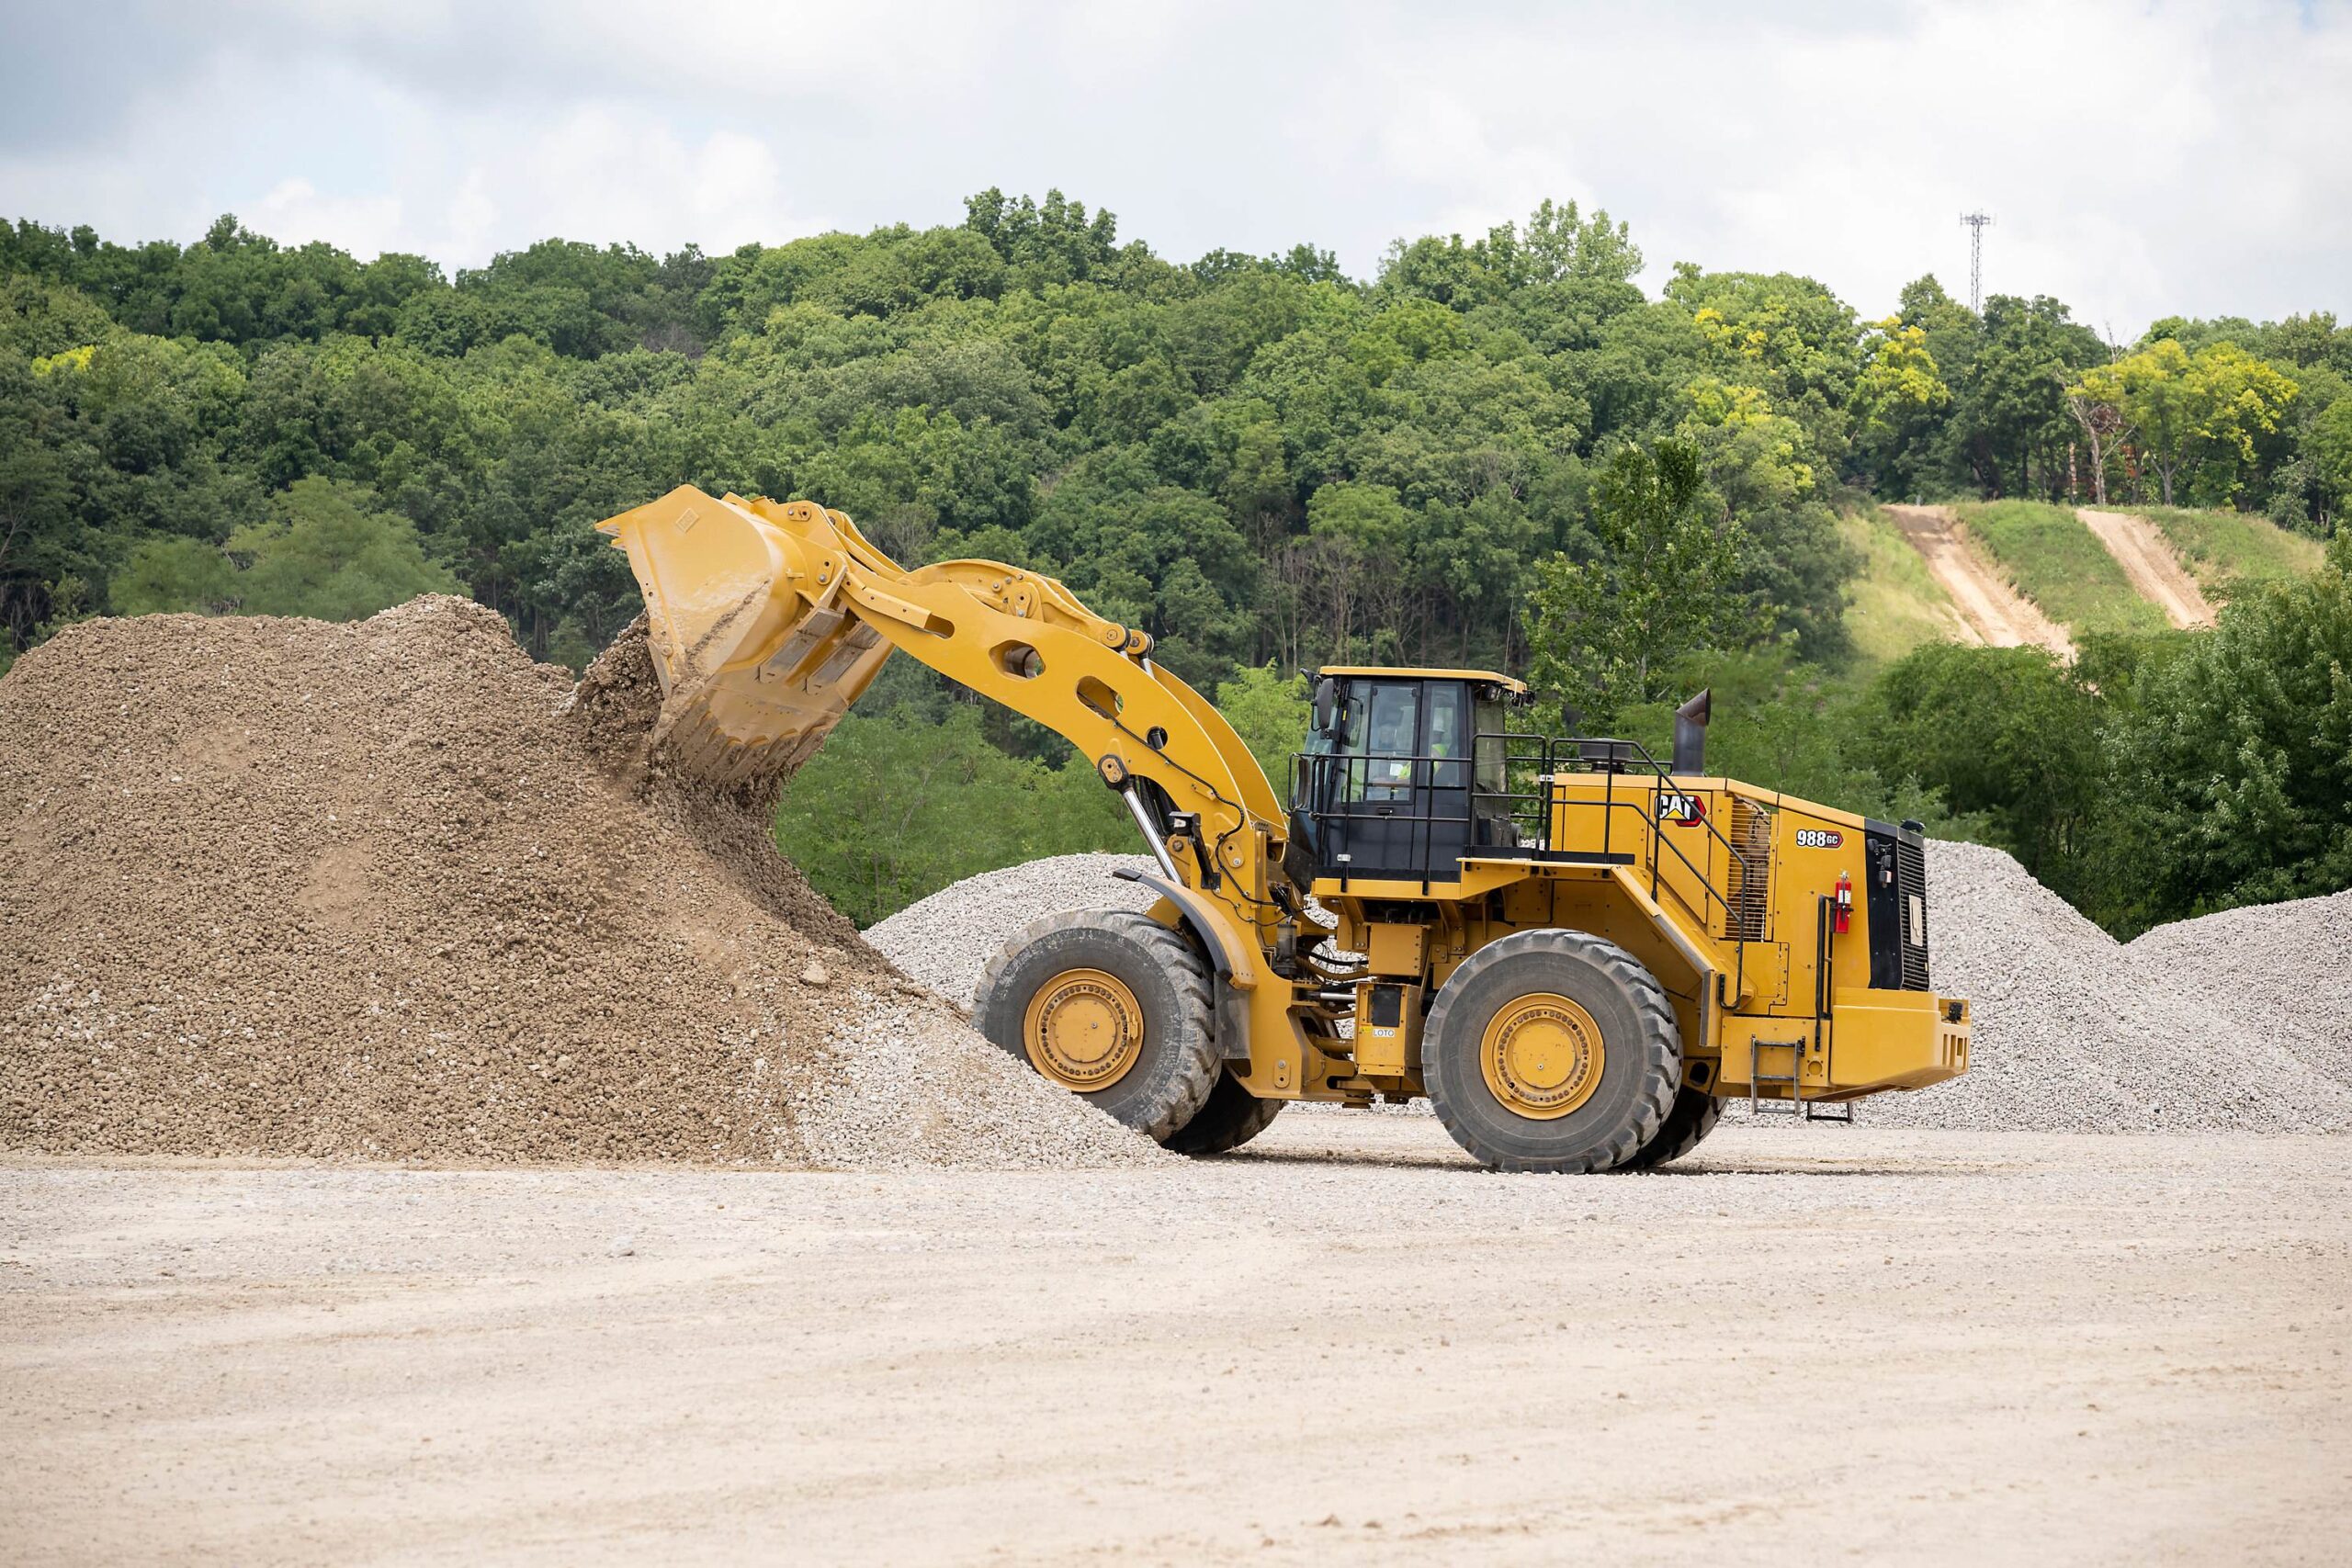 Simple integrated technologies help to increase the 988 GC’s productivity and efficiency.